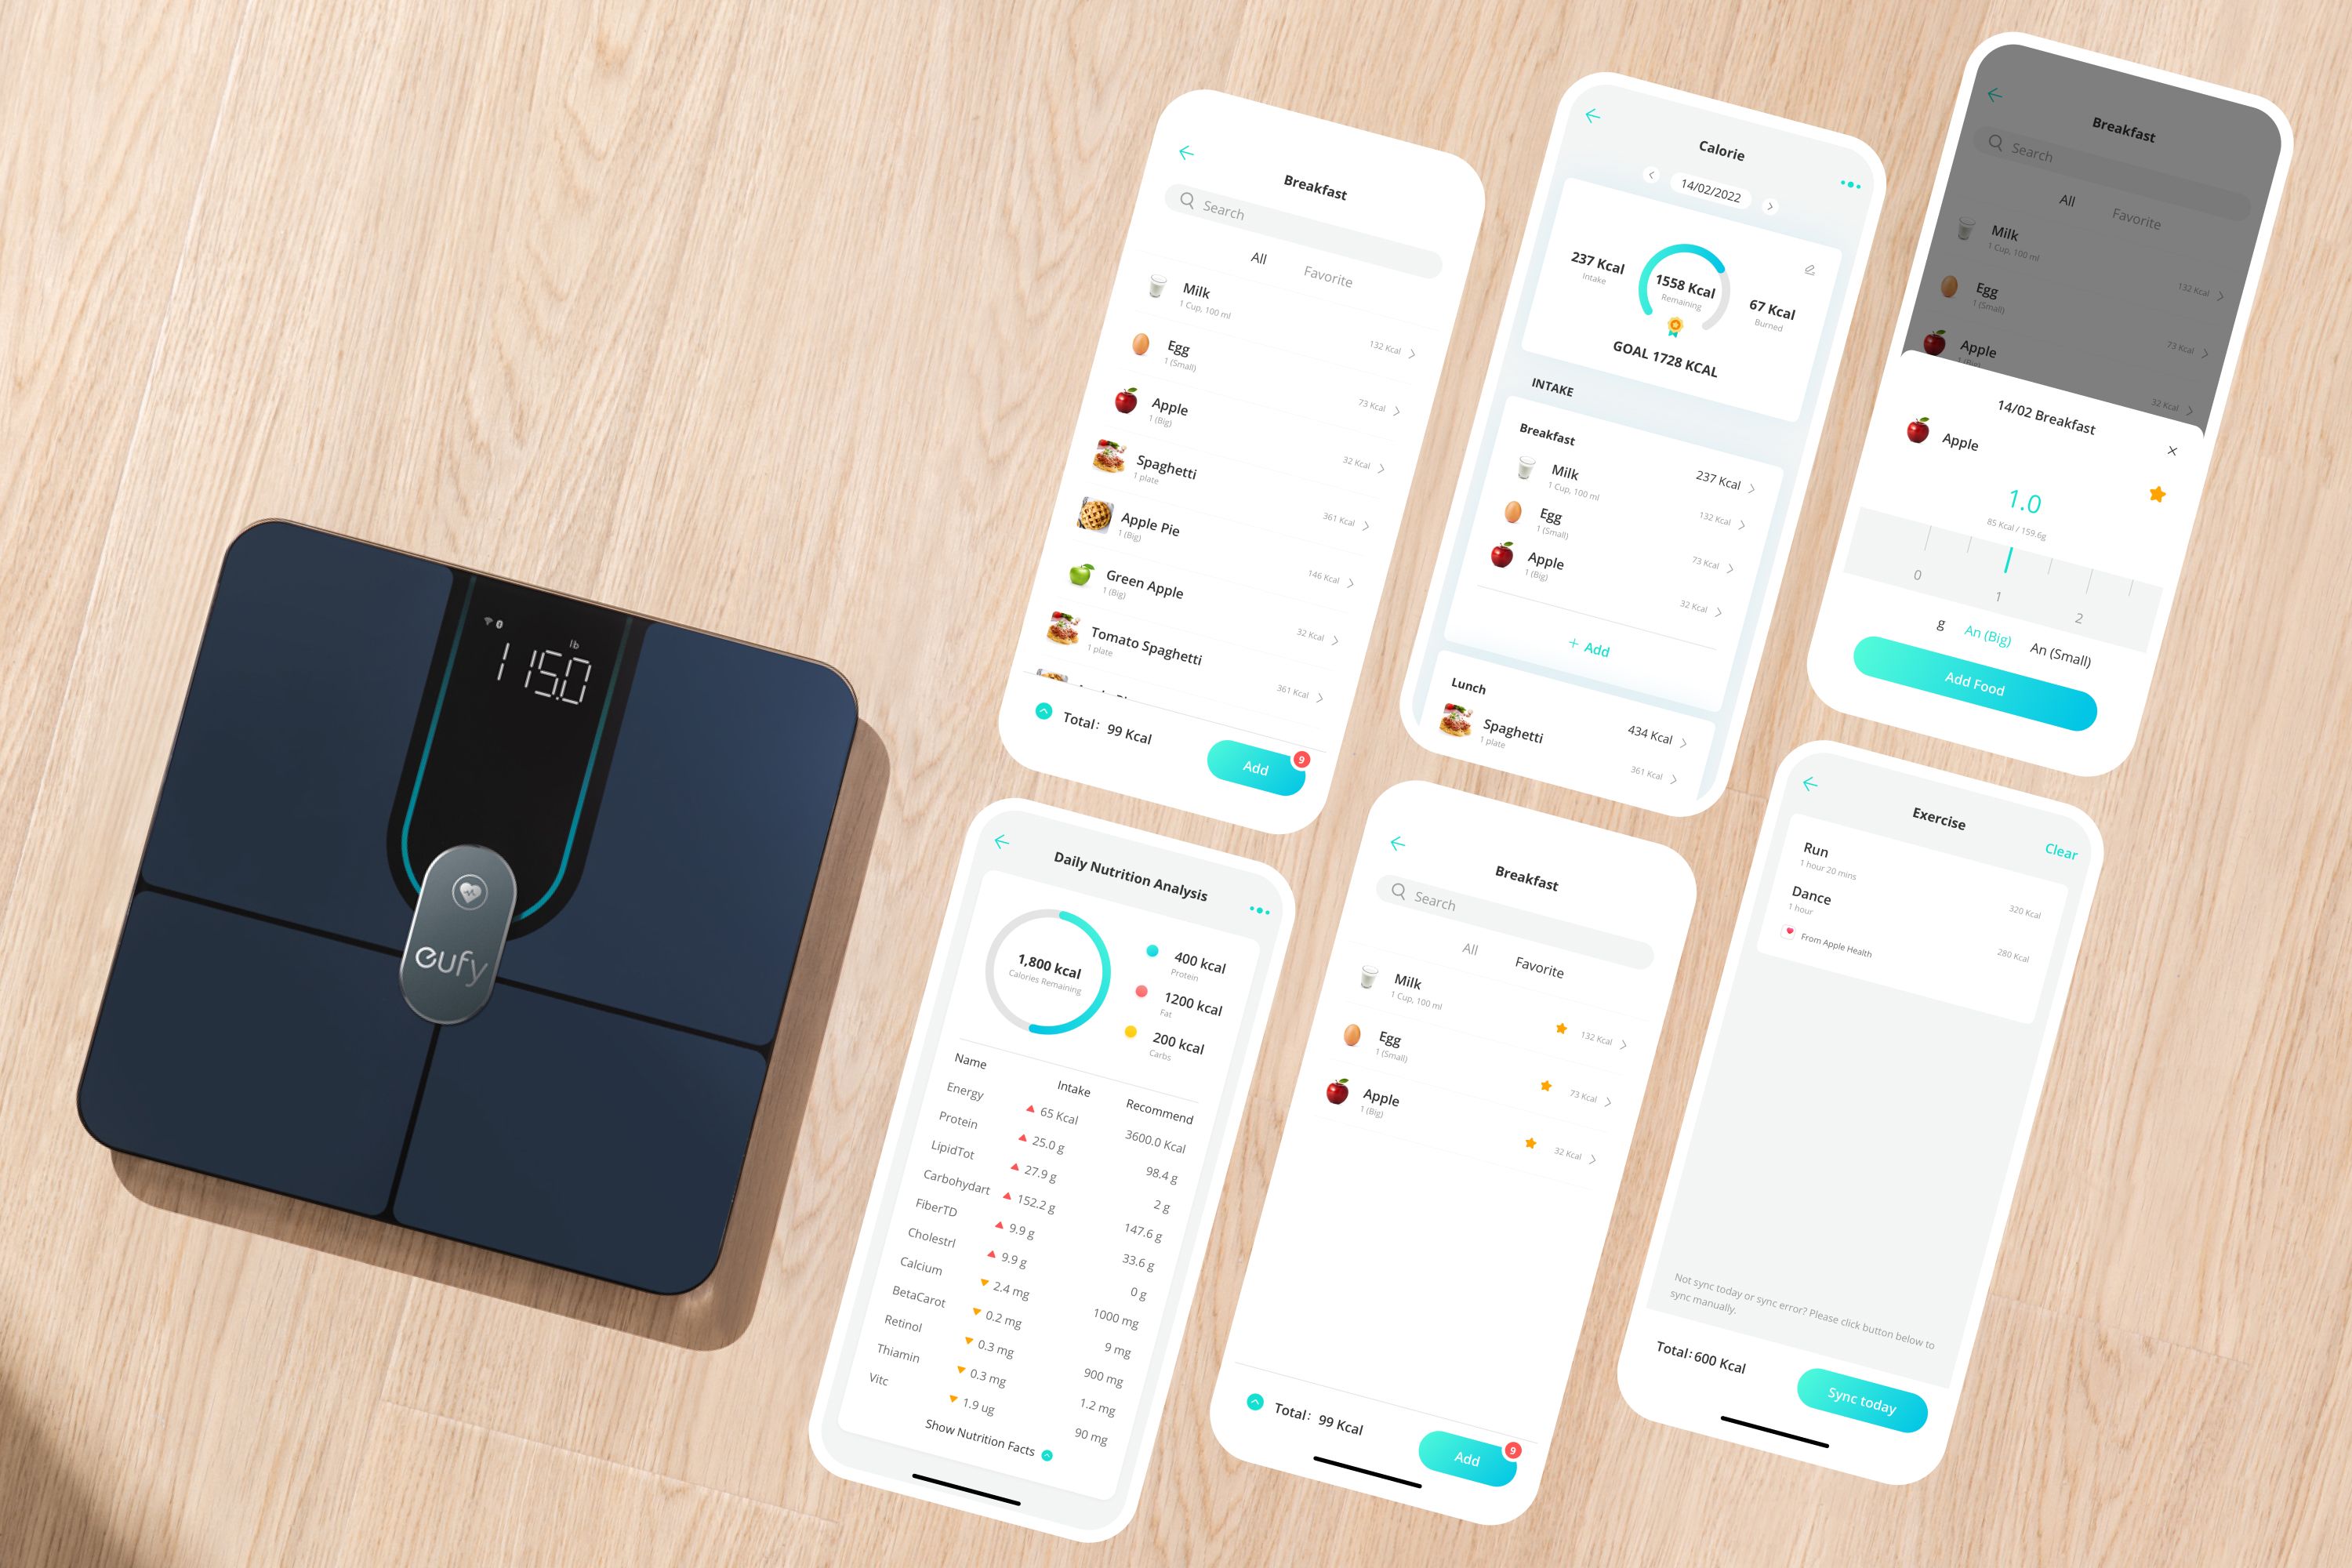 eufyLife — Smart Scale P2 Pro App  Anker Innovations Technology Co.,  Limited 